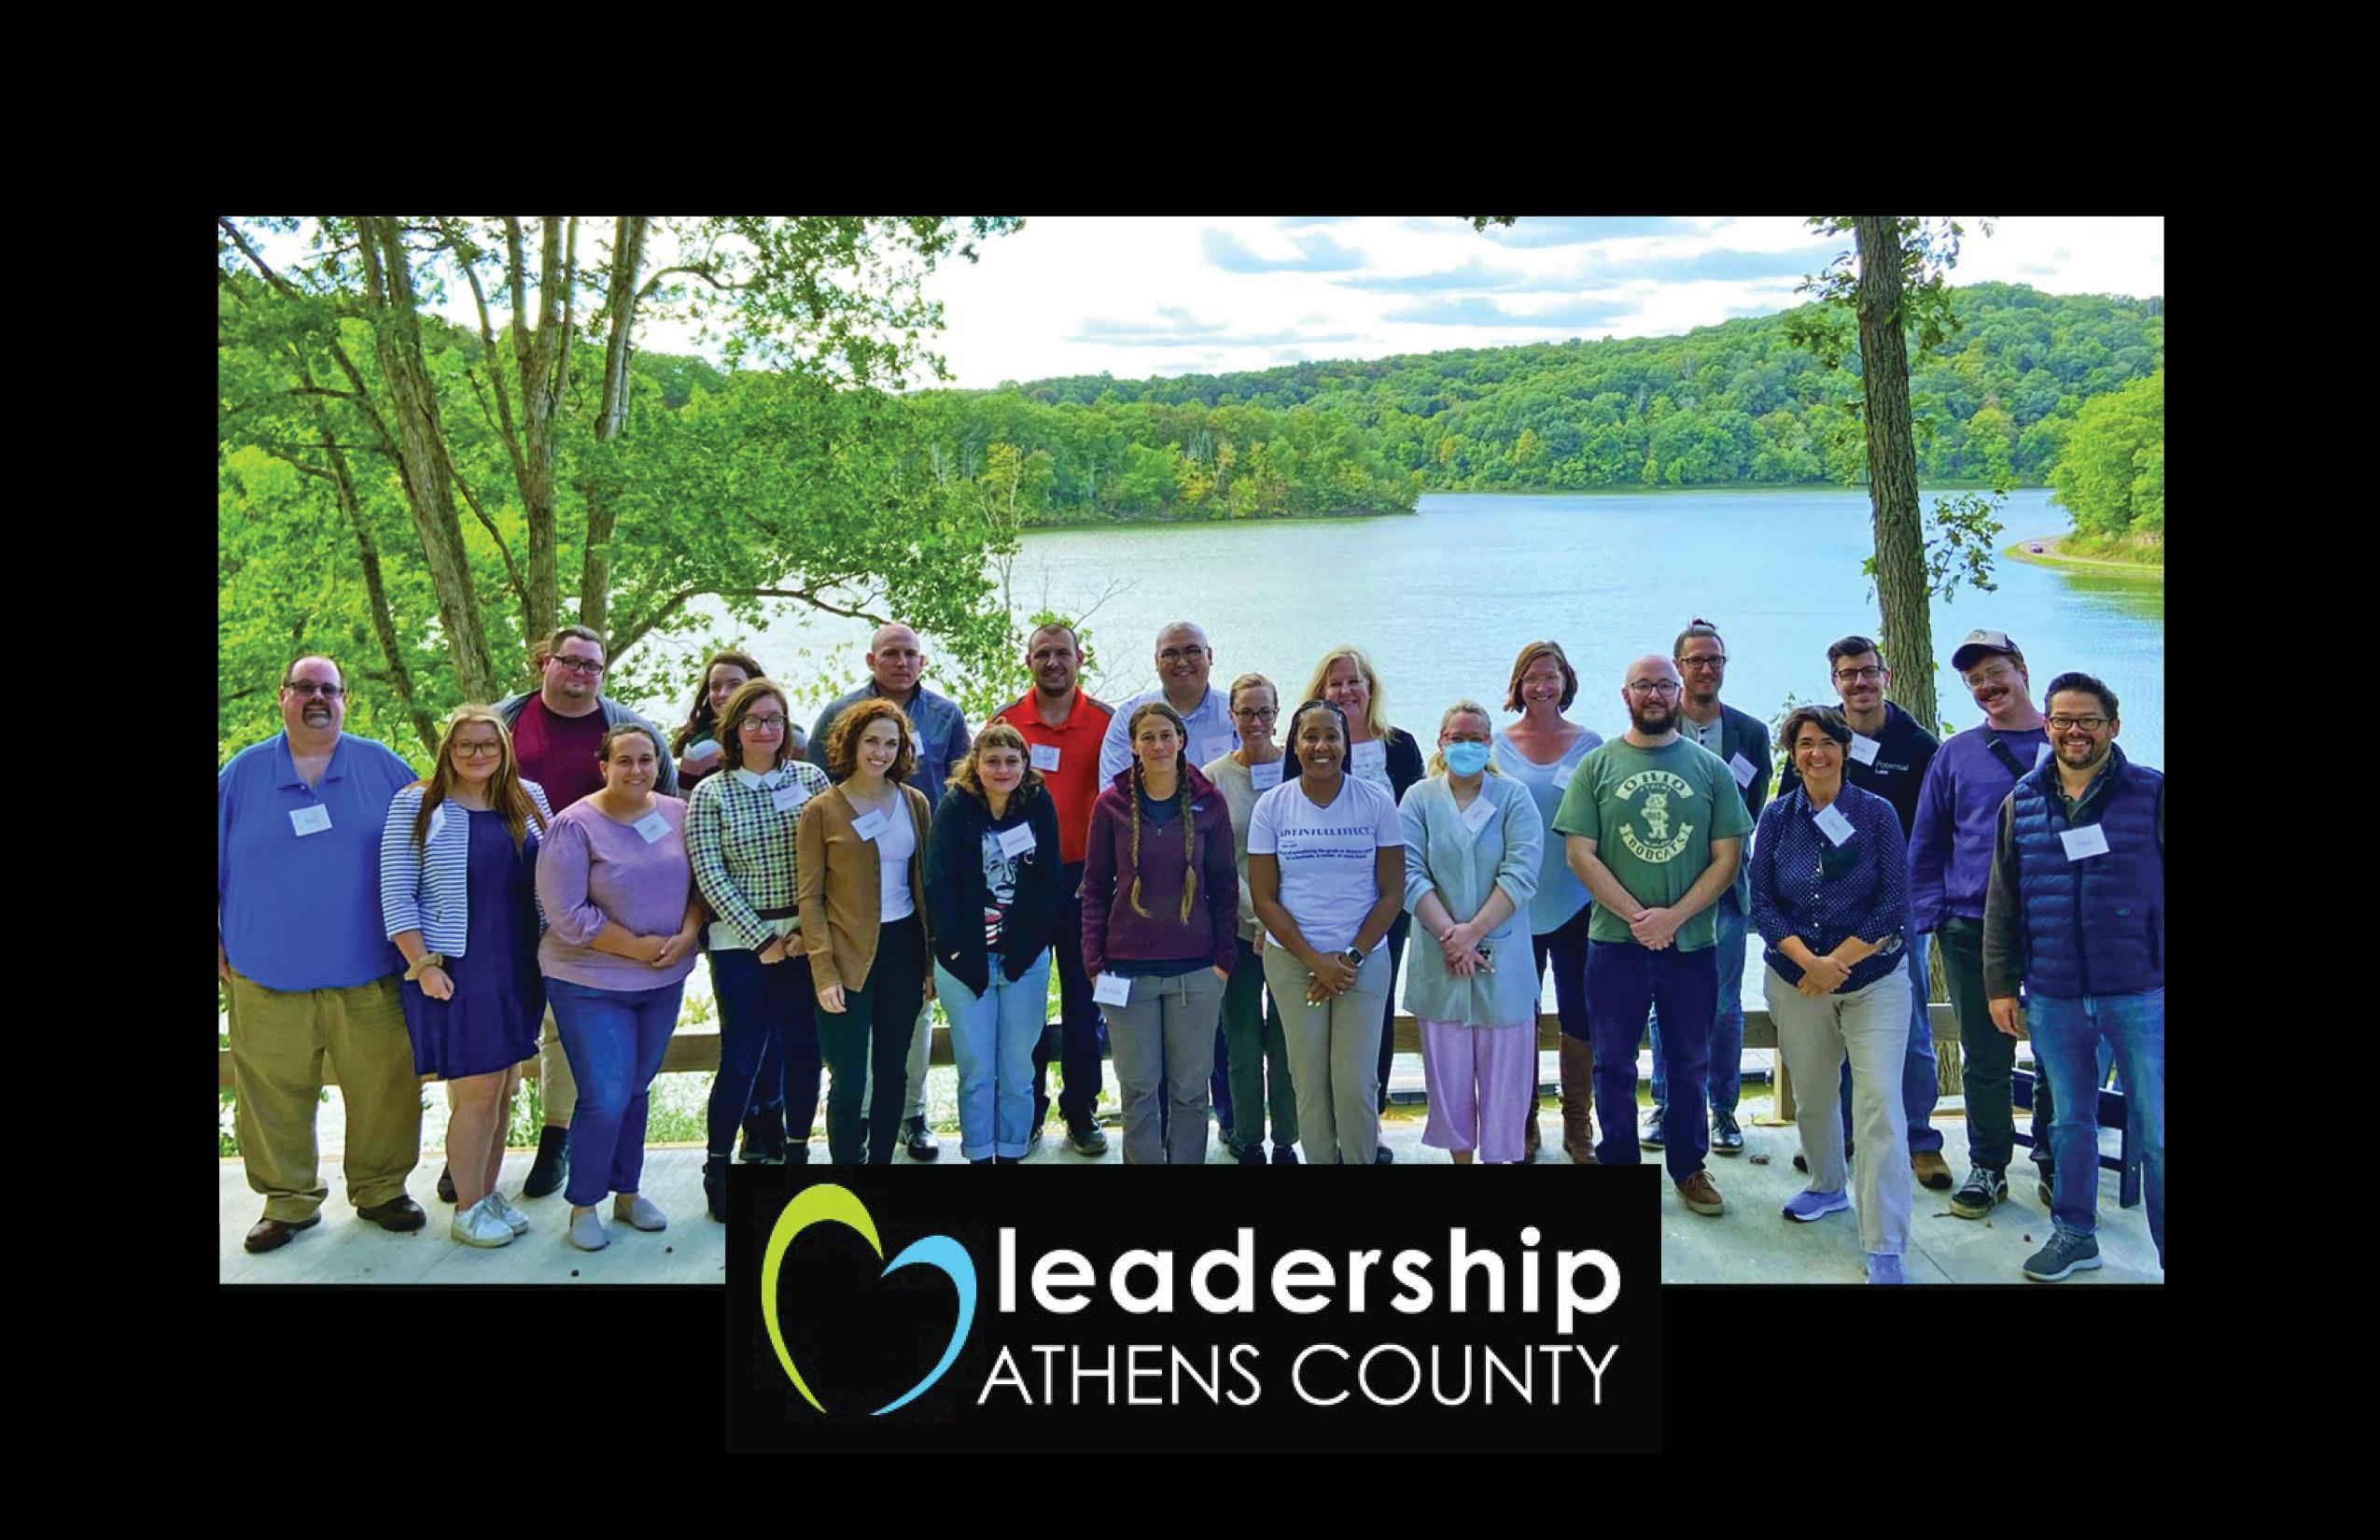 A large group photo standing infront of a lake surrounded by trees. Logo of "Leadership Athens County" is layered at the bottom of image.